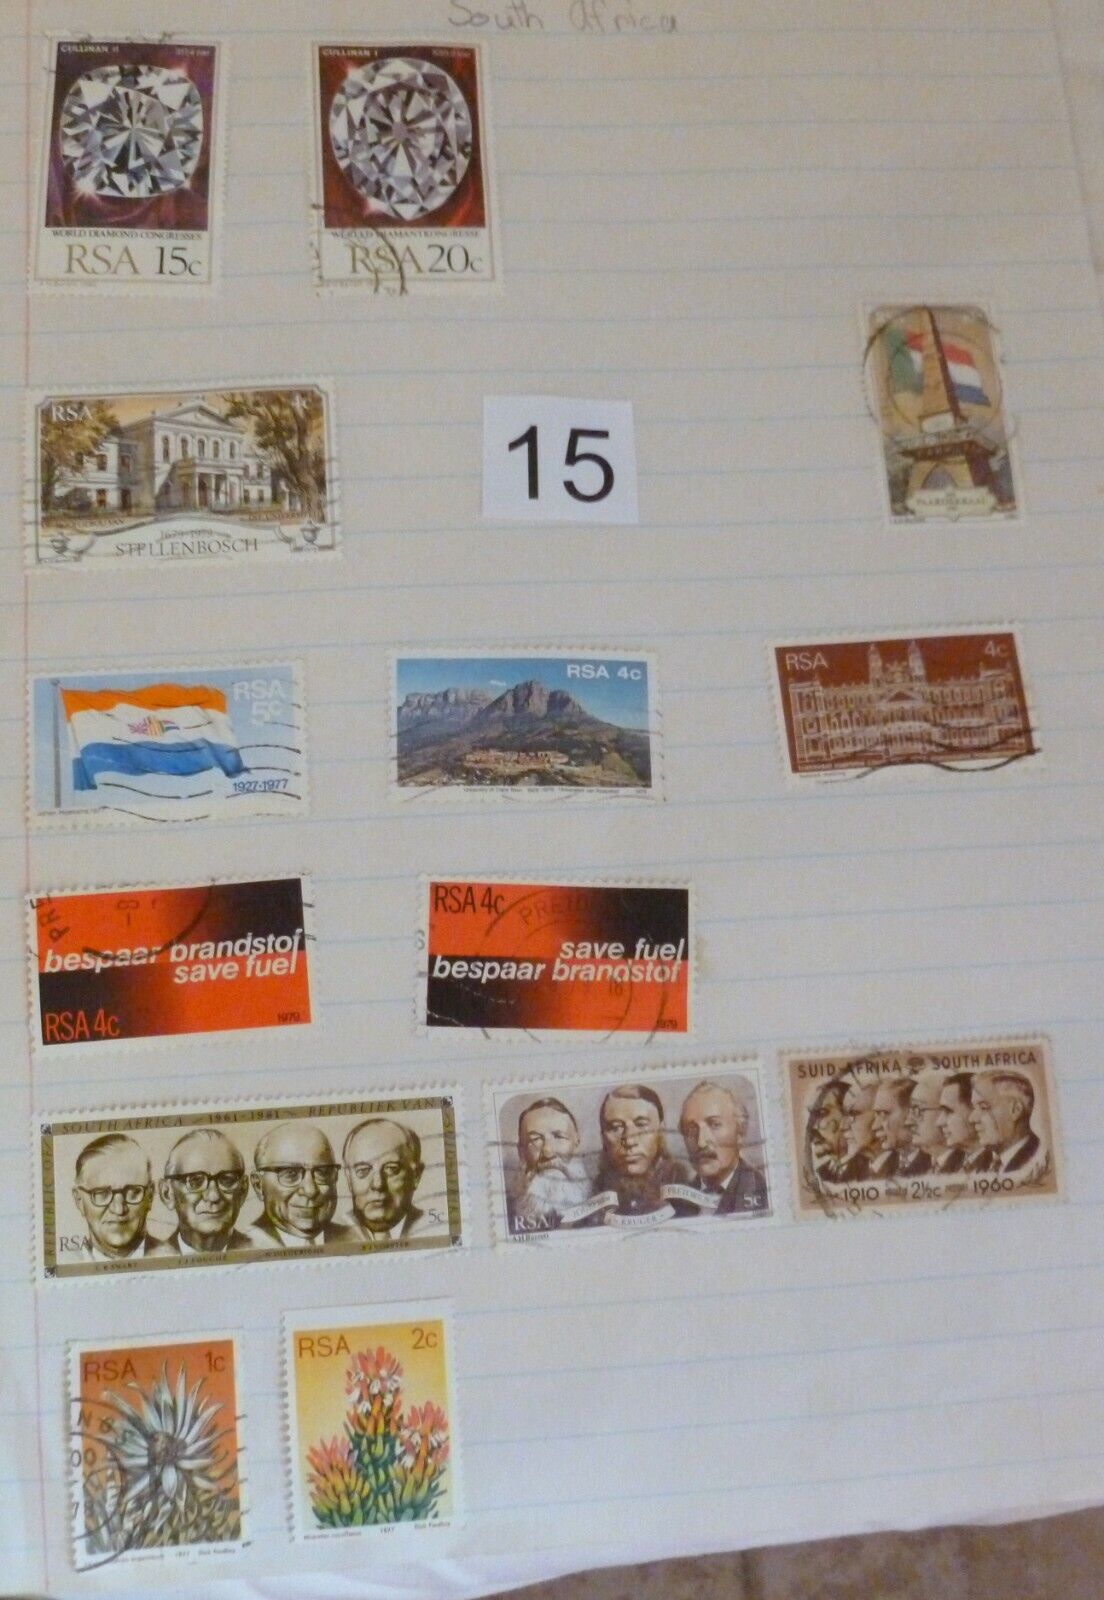 SOUTH AFRICA 14 POSTAGE STAMPS Presidents SA Flag Cullinan Diamonds UCT 50 years Без бренда